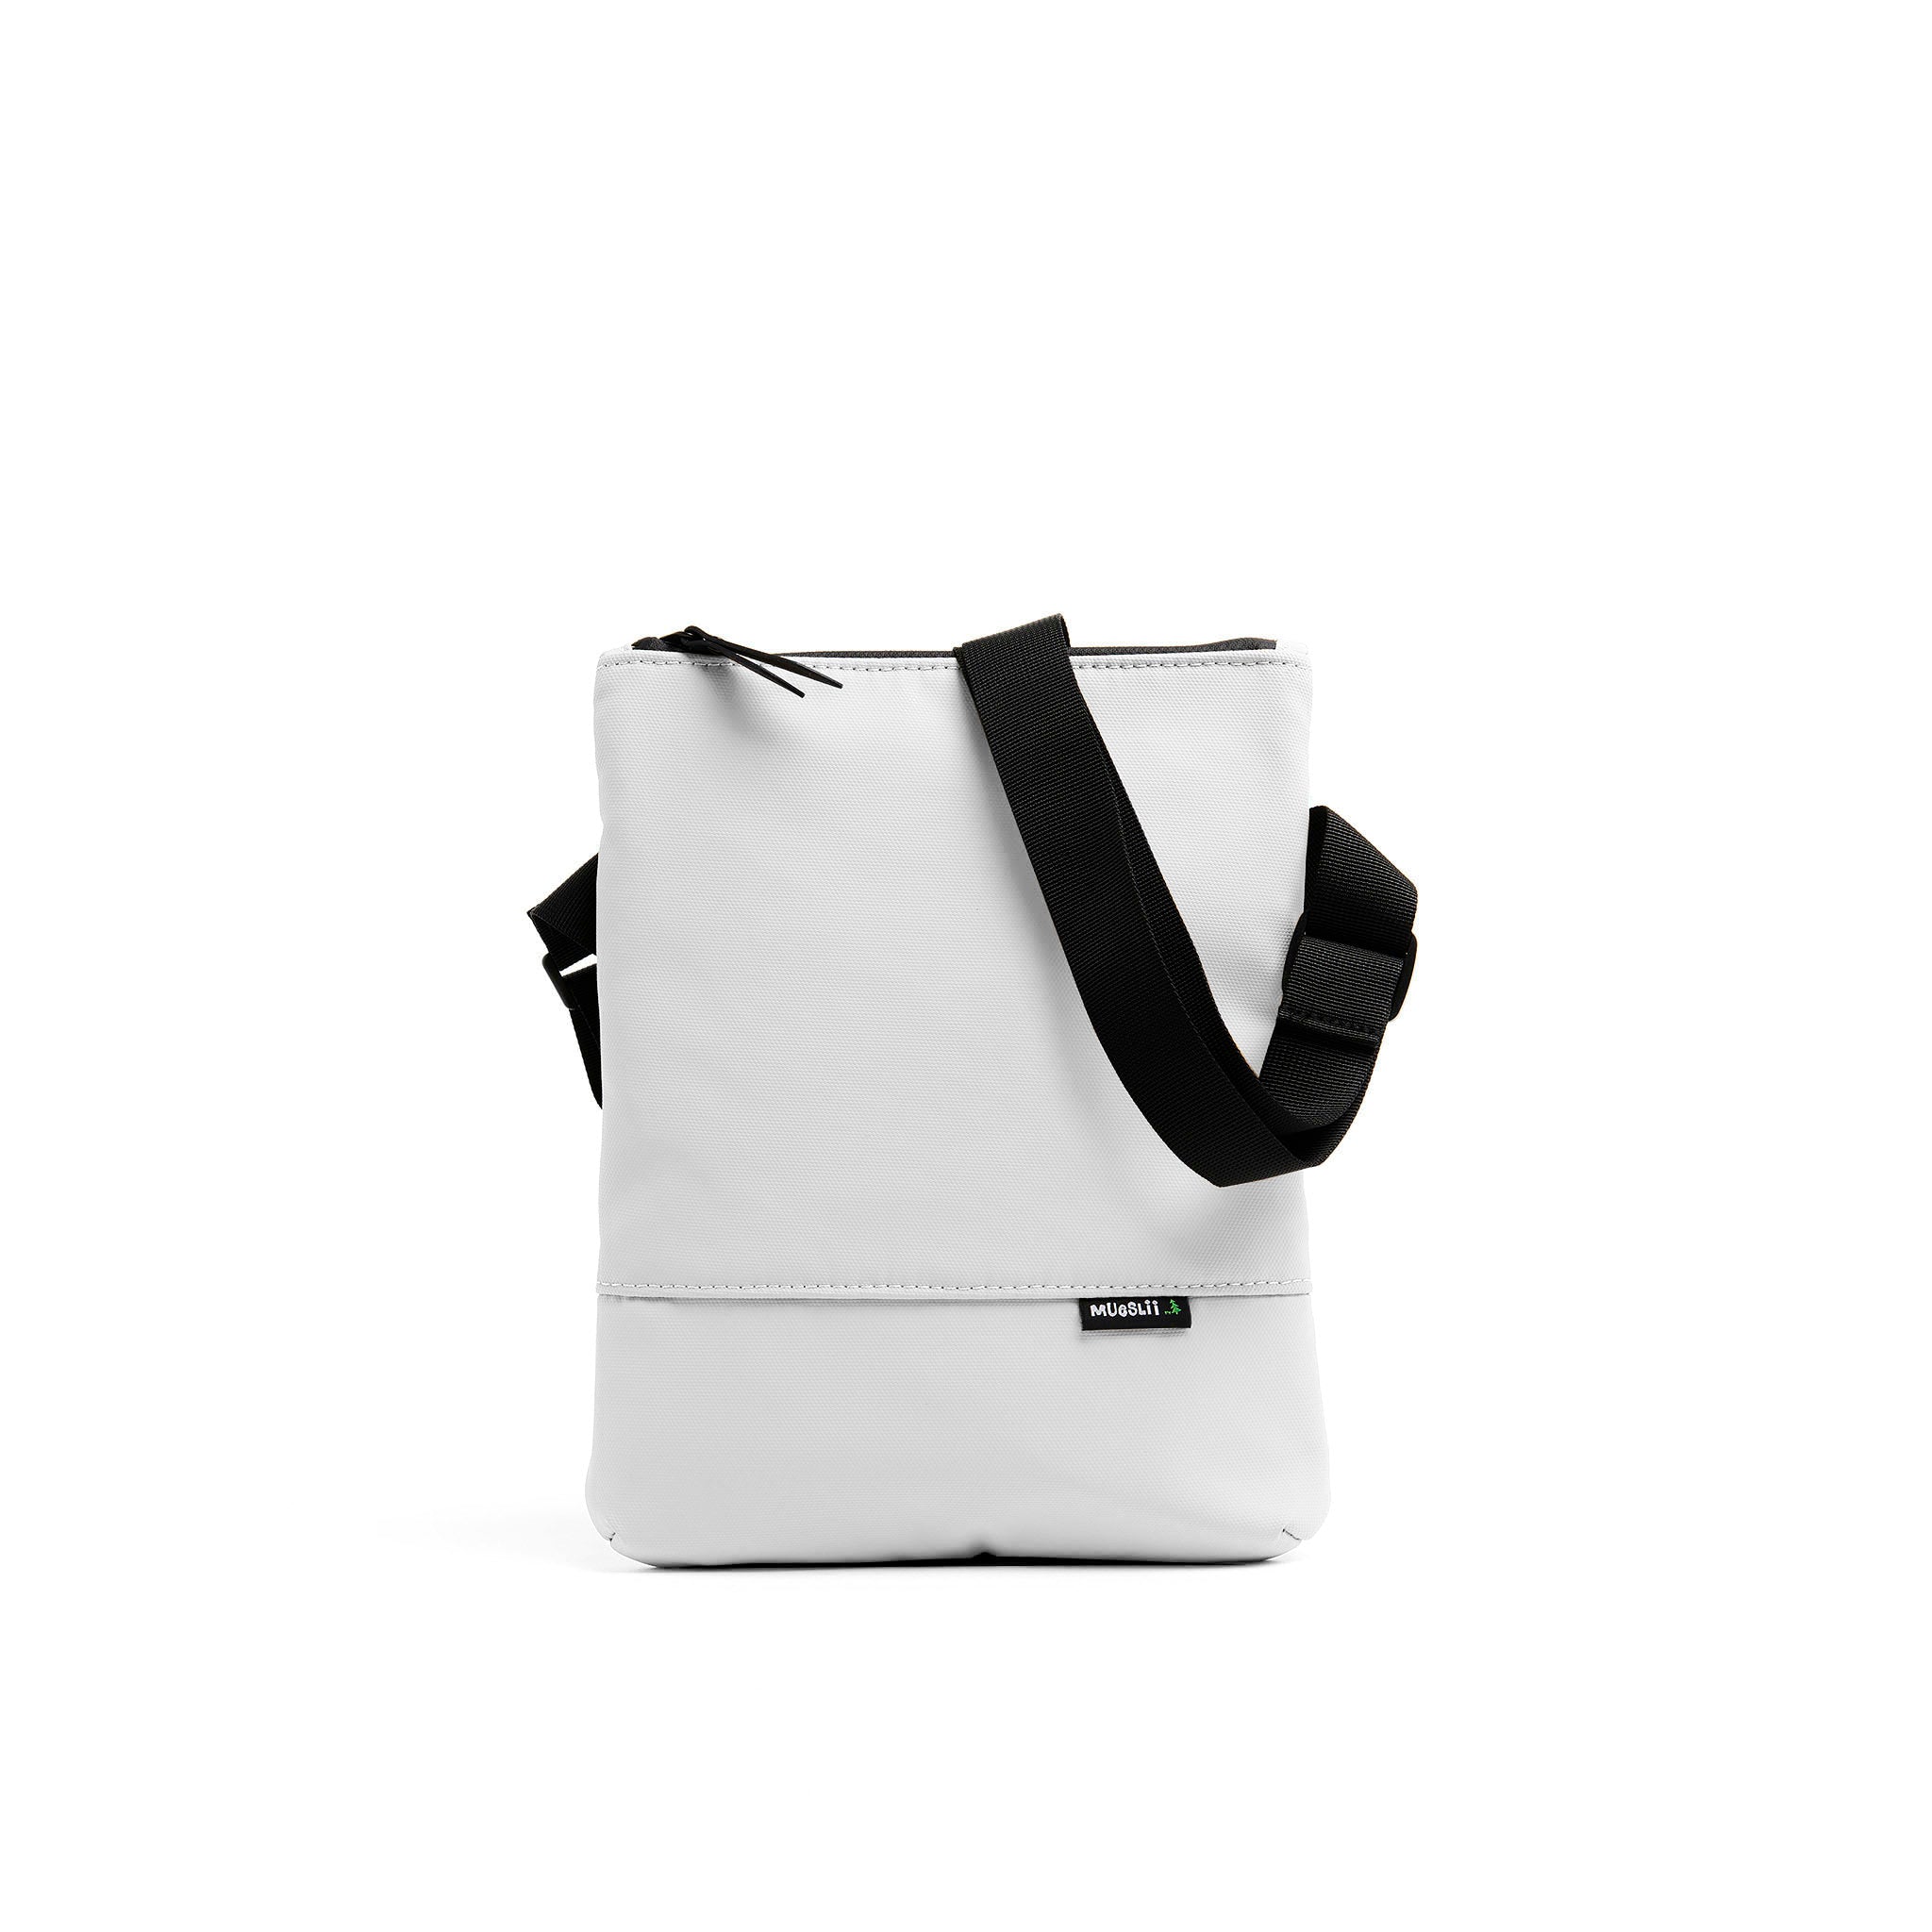 Mueslii crossbody, made of PU coated waterproof nylon, color pure white, front view.